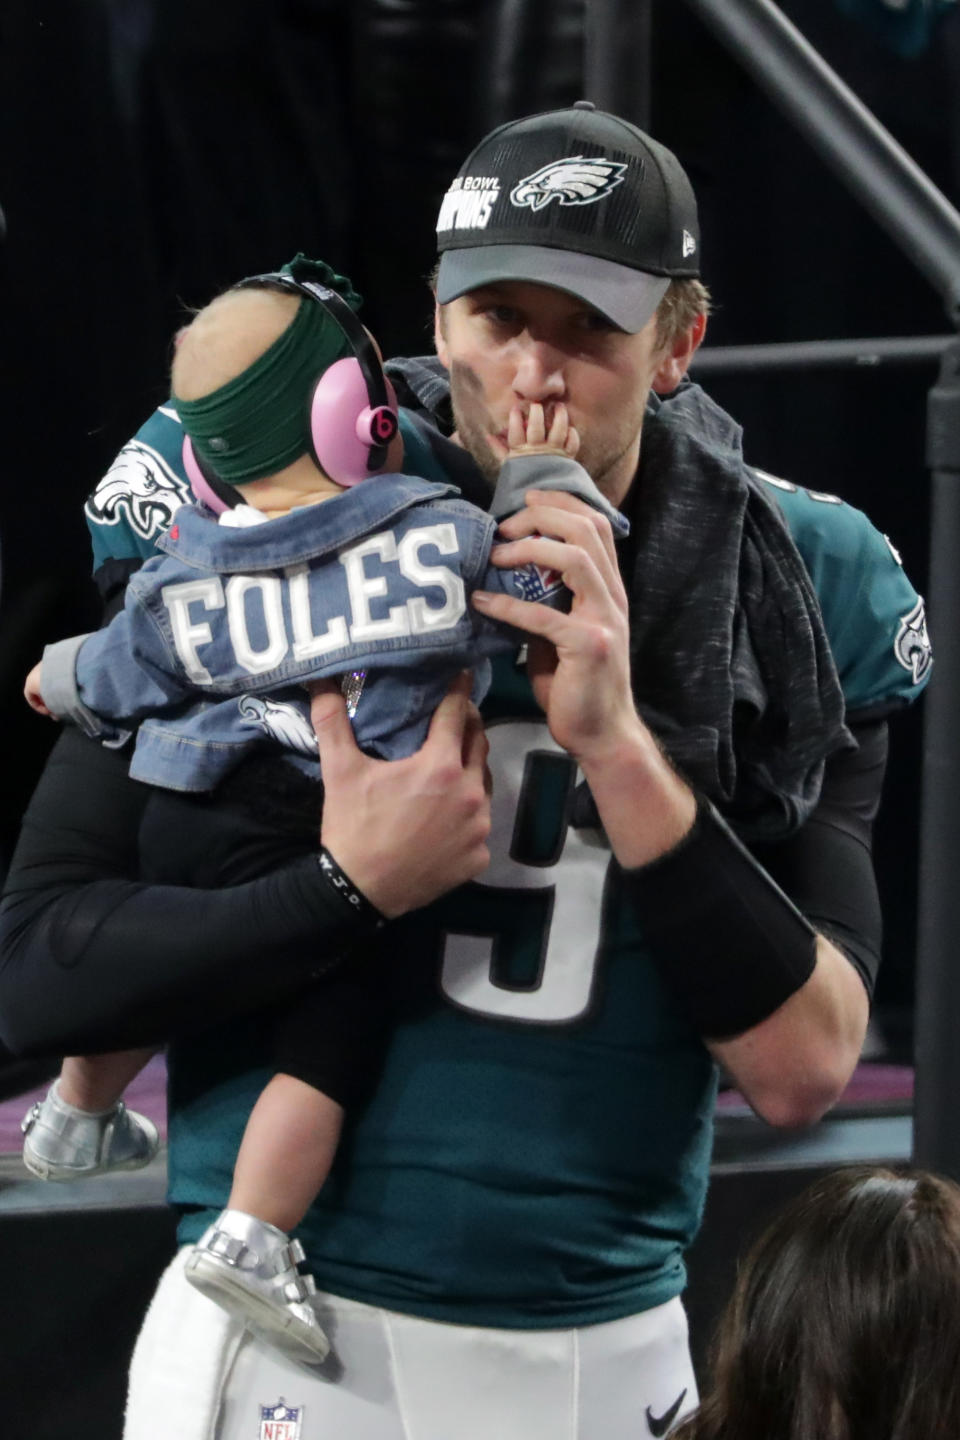 <p>Nick Foles #9 of the Philadelphia Eagles celebrates with his daughter Lily Foles after his 41-33 victory over the New England Patriots in Super Bowl LII at U.S. Bank Stadium on February 4, 2018 in Minneapolis, Minnesota. The Philadelphia Eagles defeated the New England Patriots 41-33. (Photo by Streeter Lecka/Getty Images) </p>